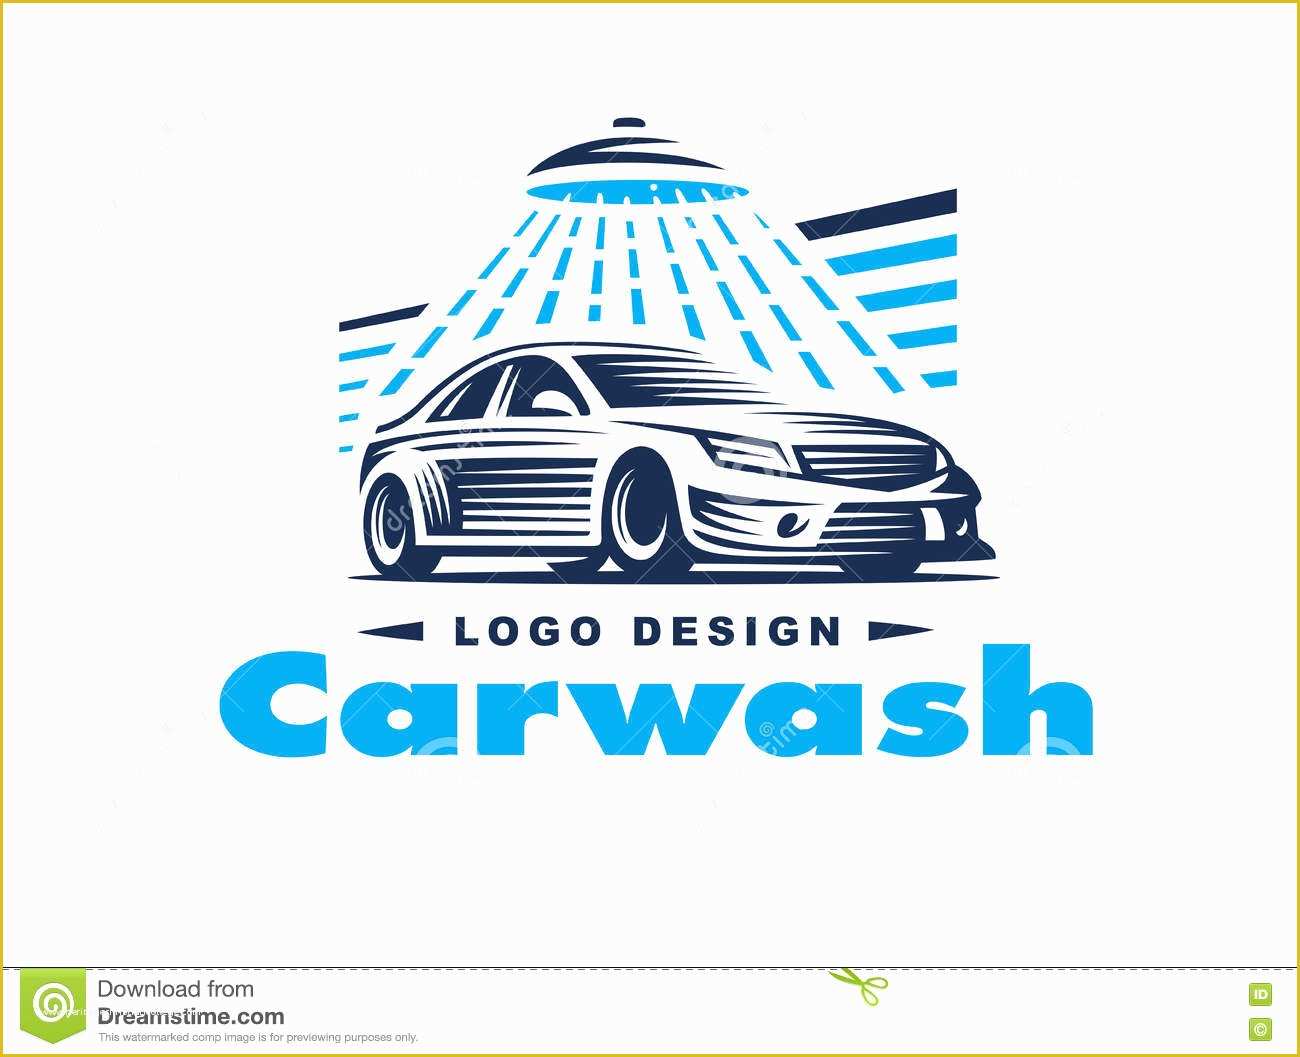 car-wash-logo-template-free-of-car-wash-logo-design-with-shower-icon